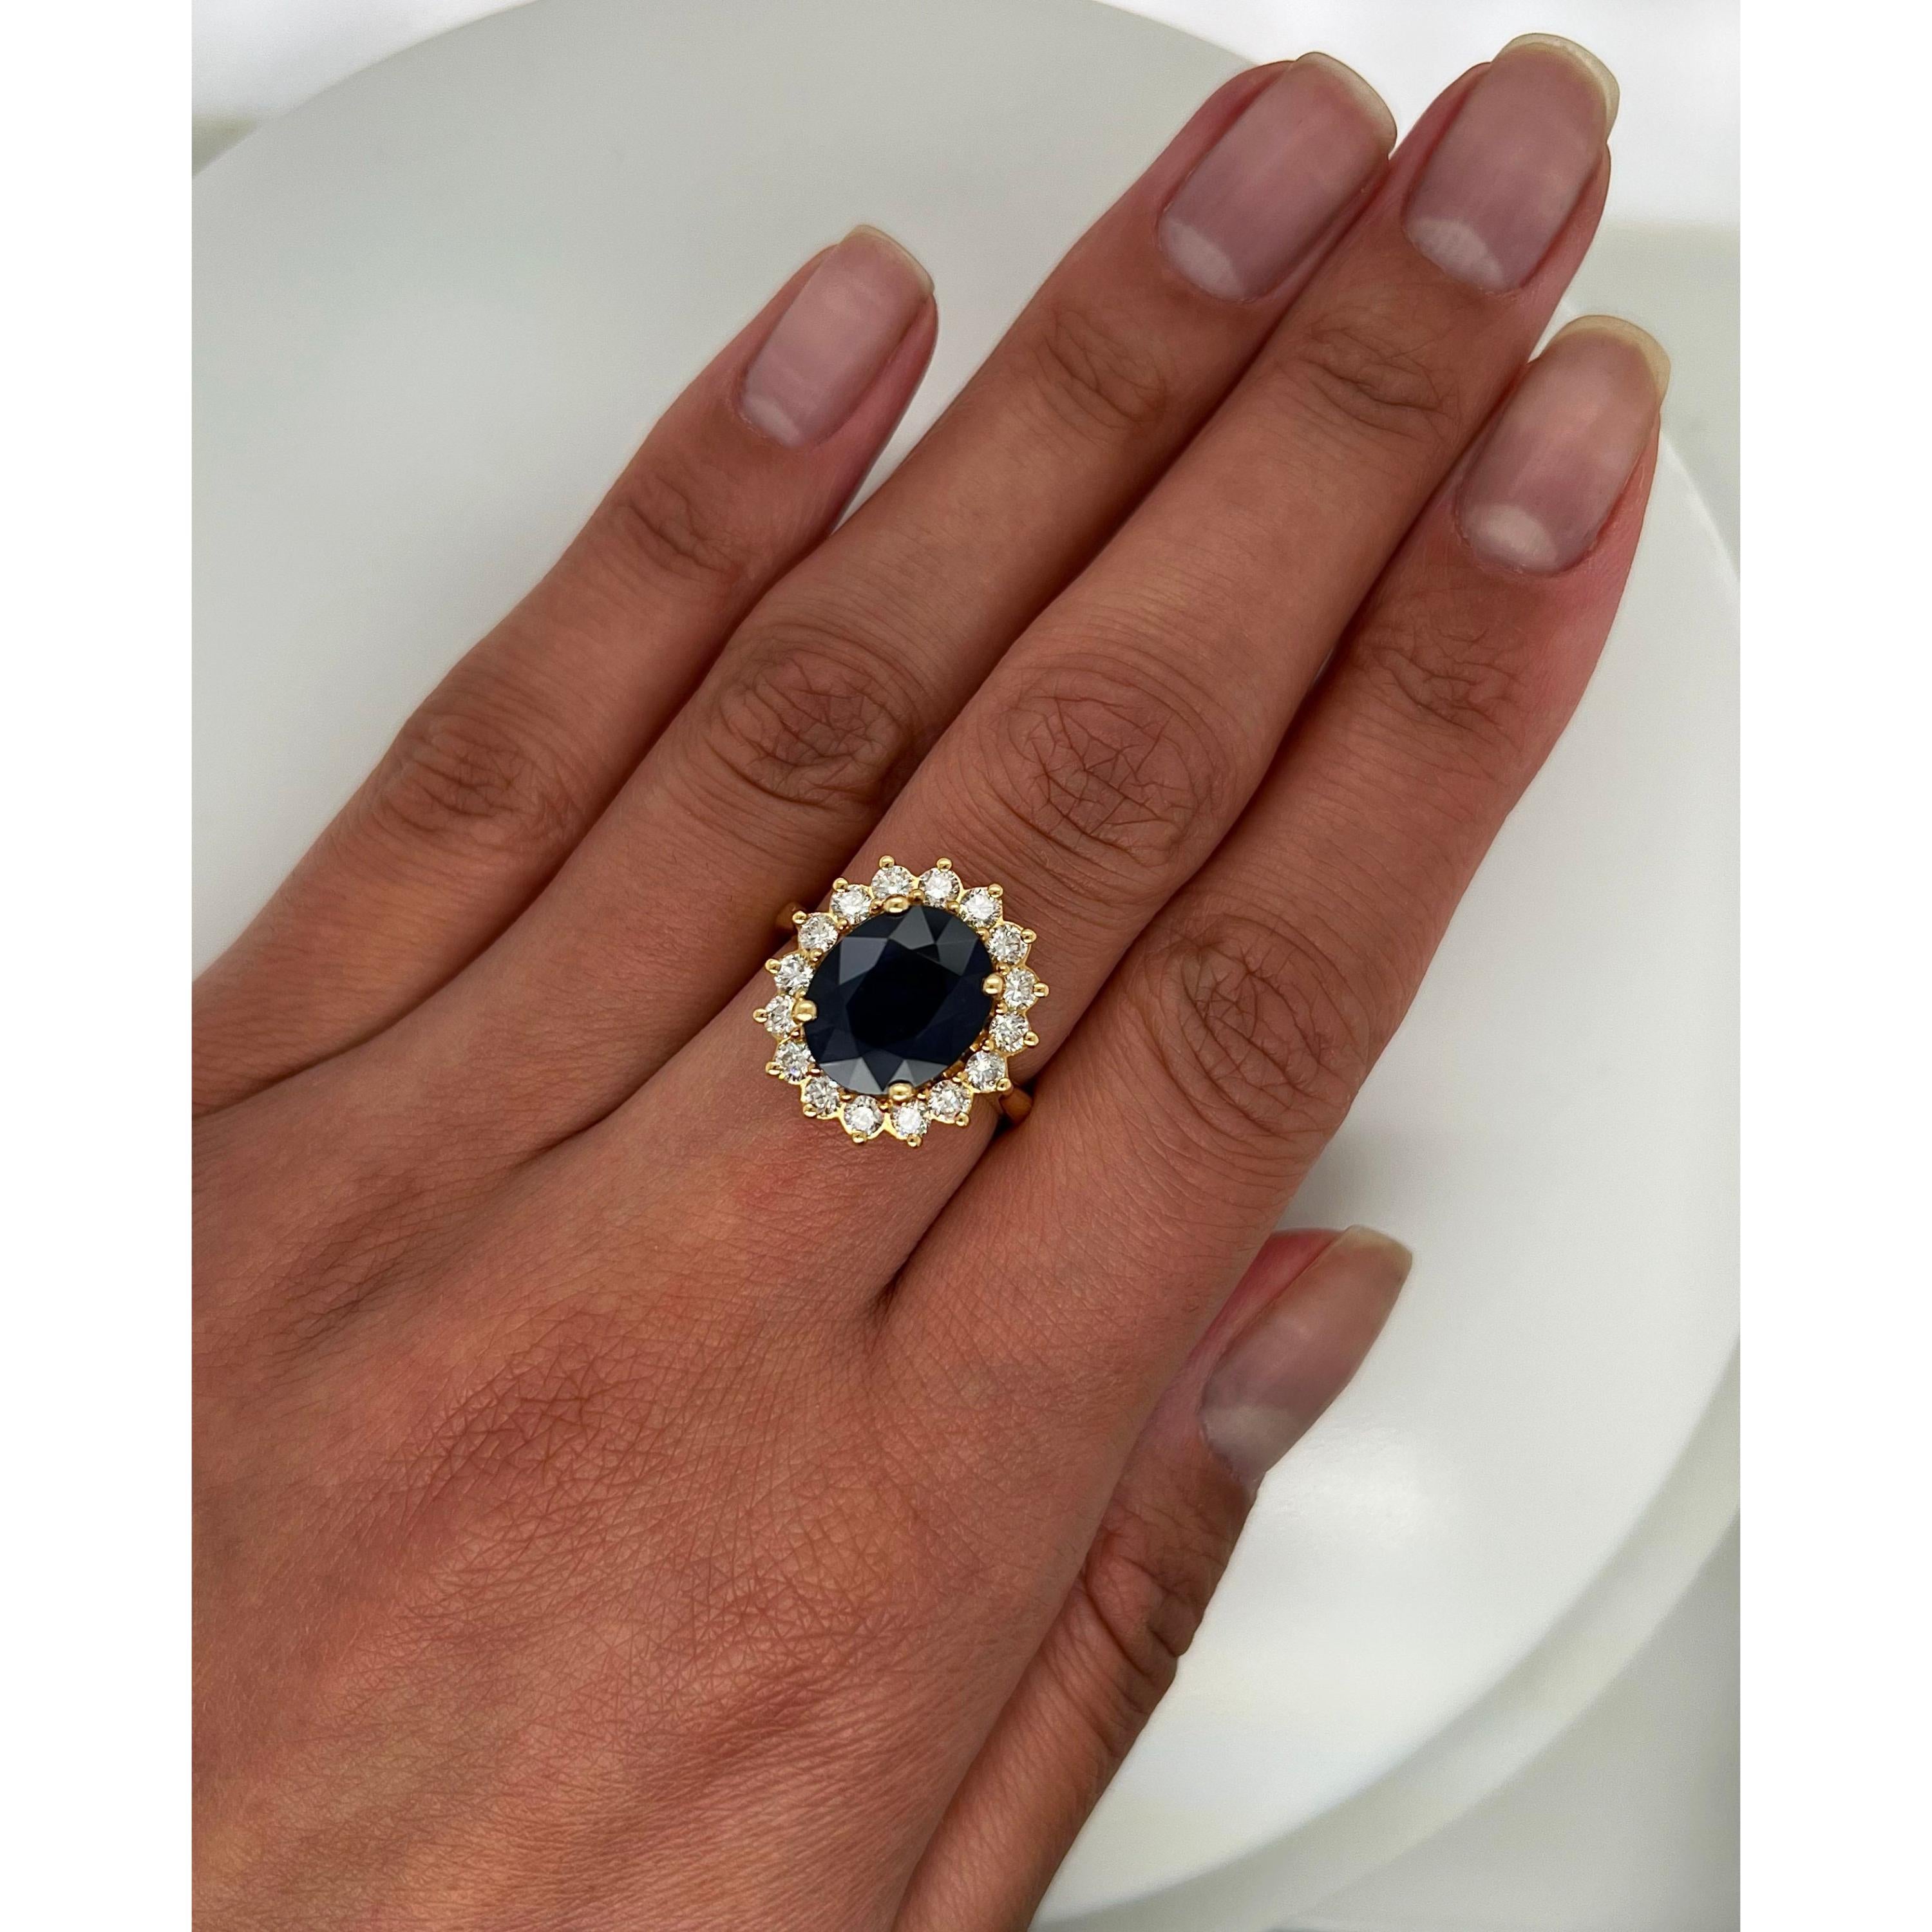 4.63 Carat Halo Blue Ceylon Sapphire Diamond Ring Floral Sapphire Ring in Gold

A stunning ring featuring IGI/GIA Certified 4.63 Carat Natural Sapphire and 0.97 Carat of Diamond Accents set in 18K Solid Gold.

Symbol of royalty, purity and